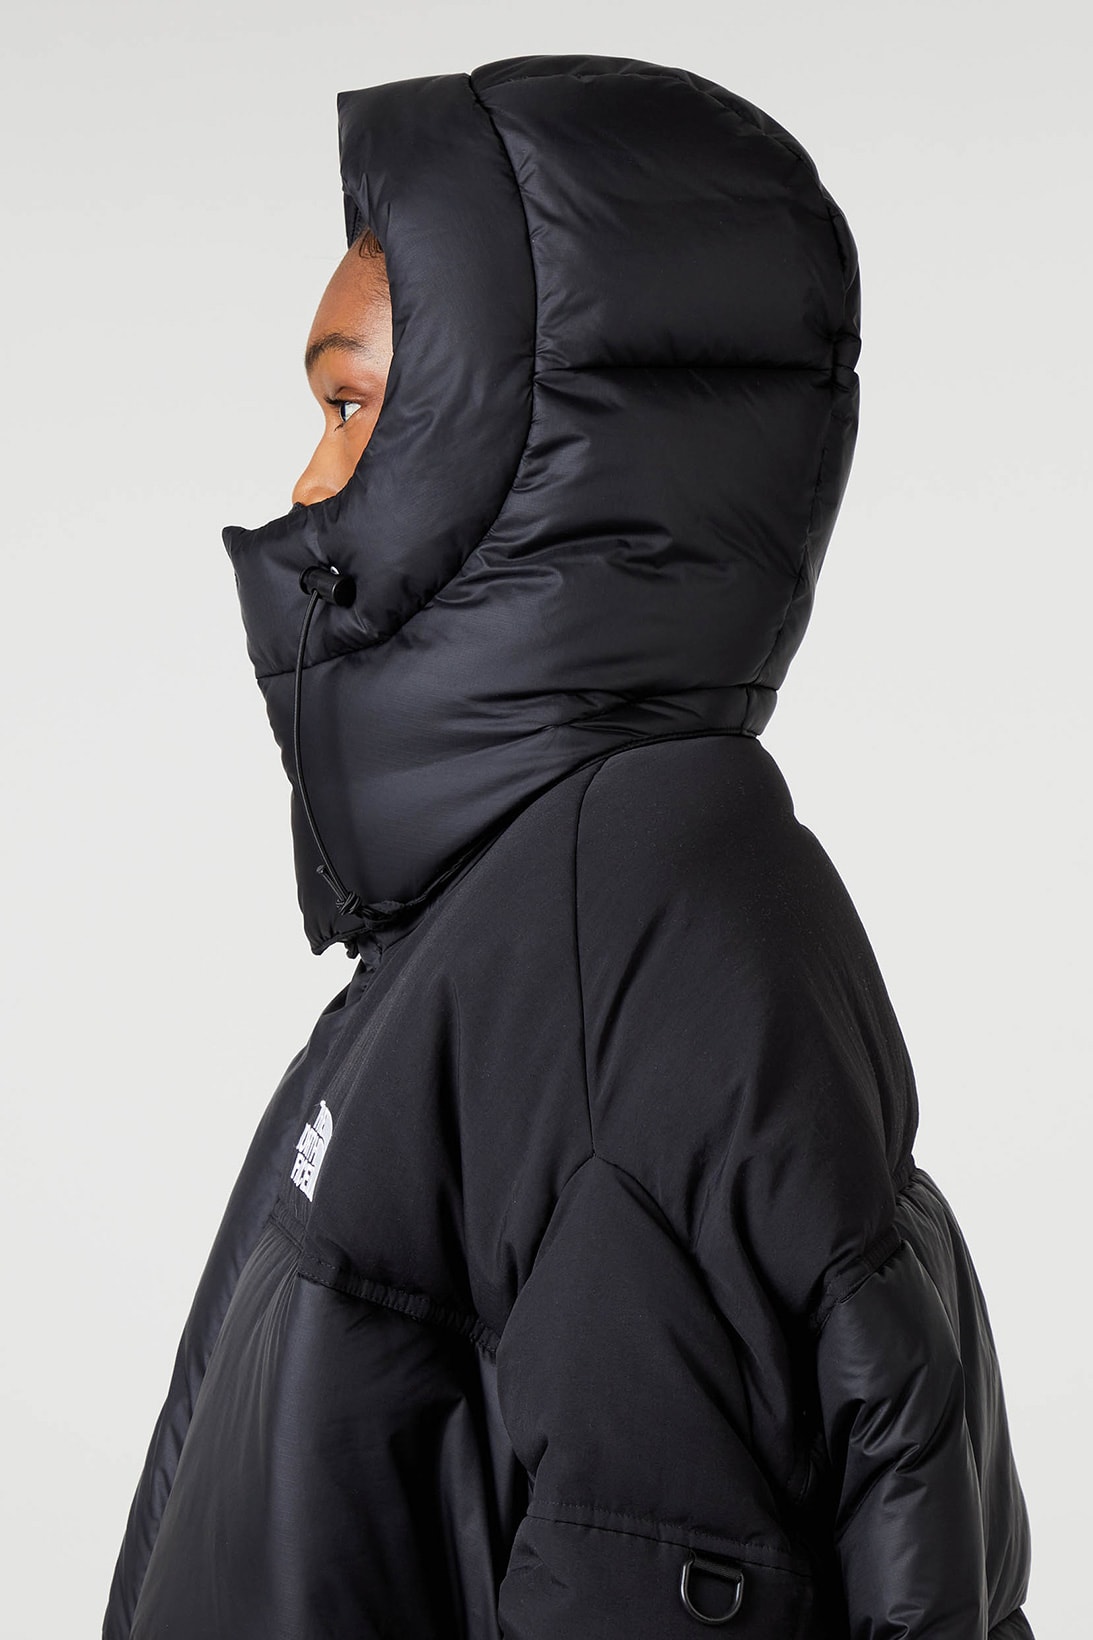 mm6 maison margiela the north face tnf collaboration closer look fall winter outerwear release price where to buy